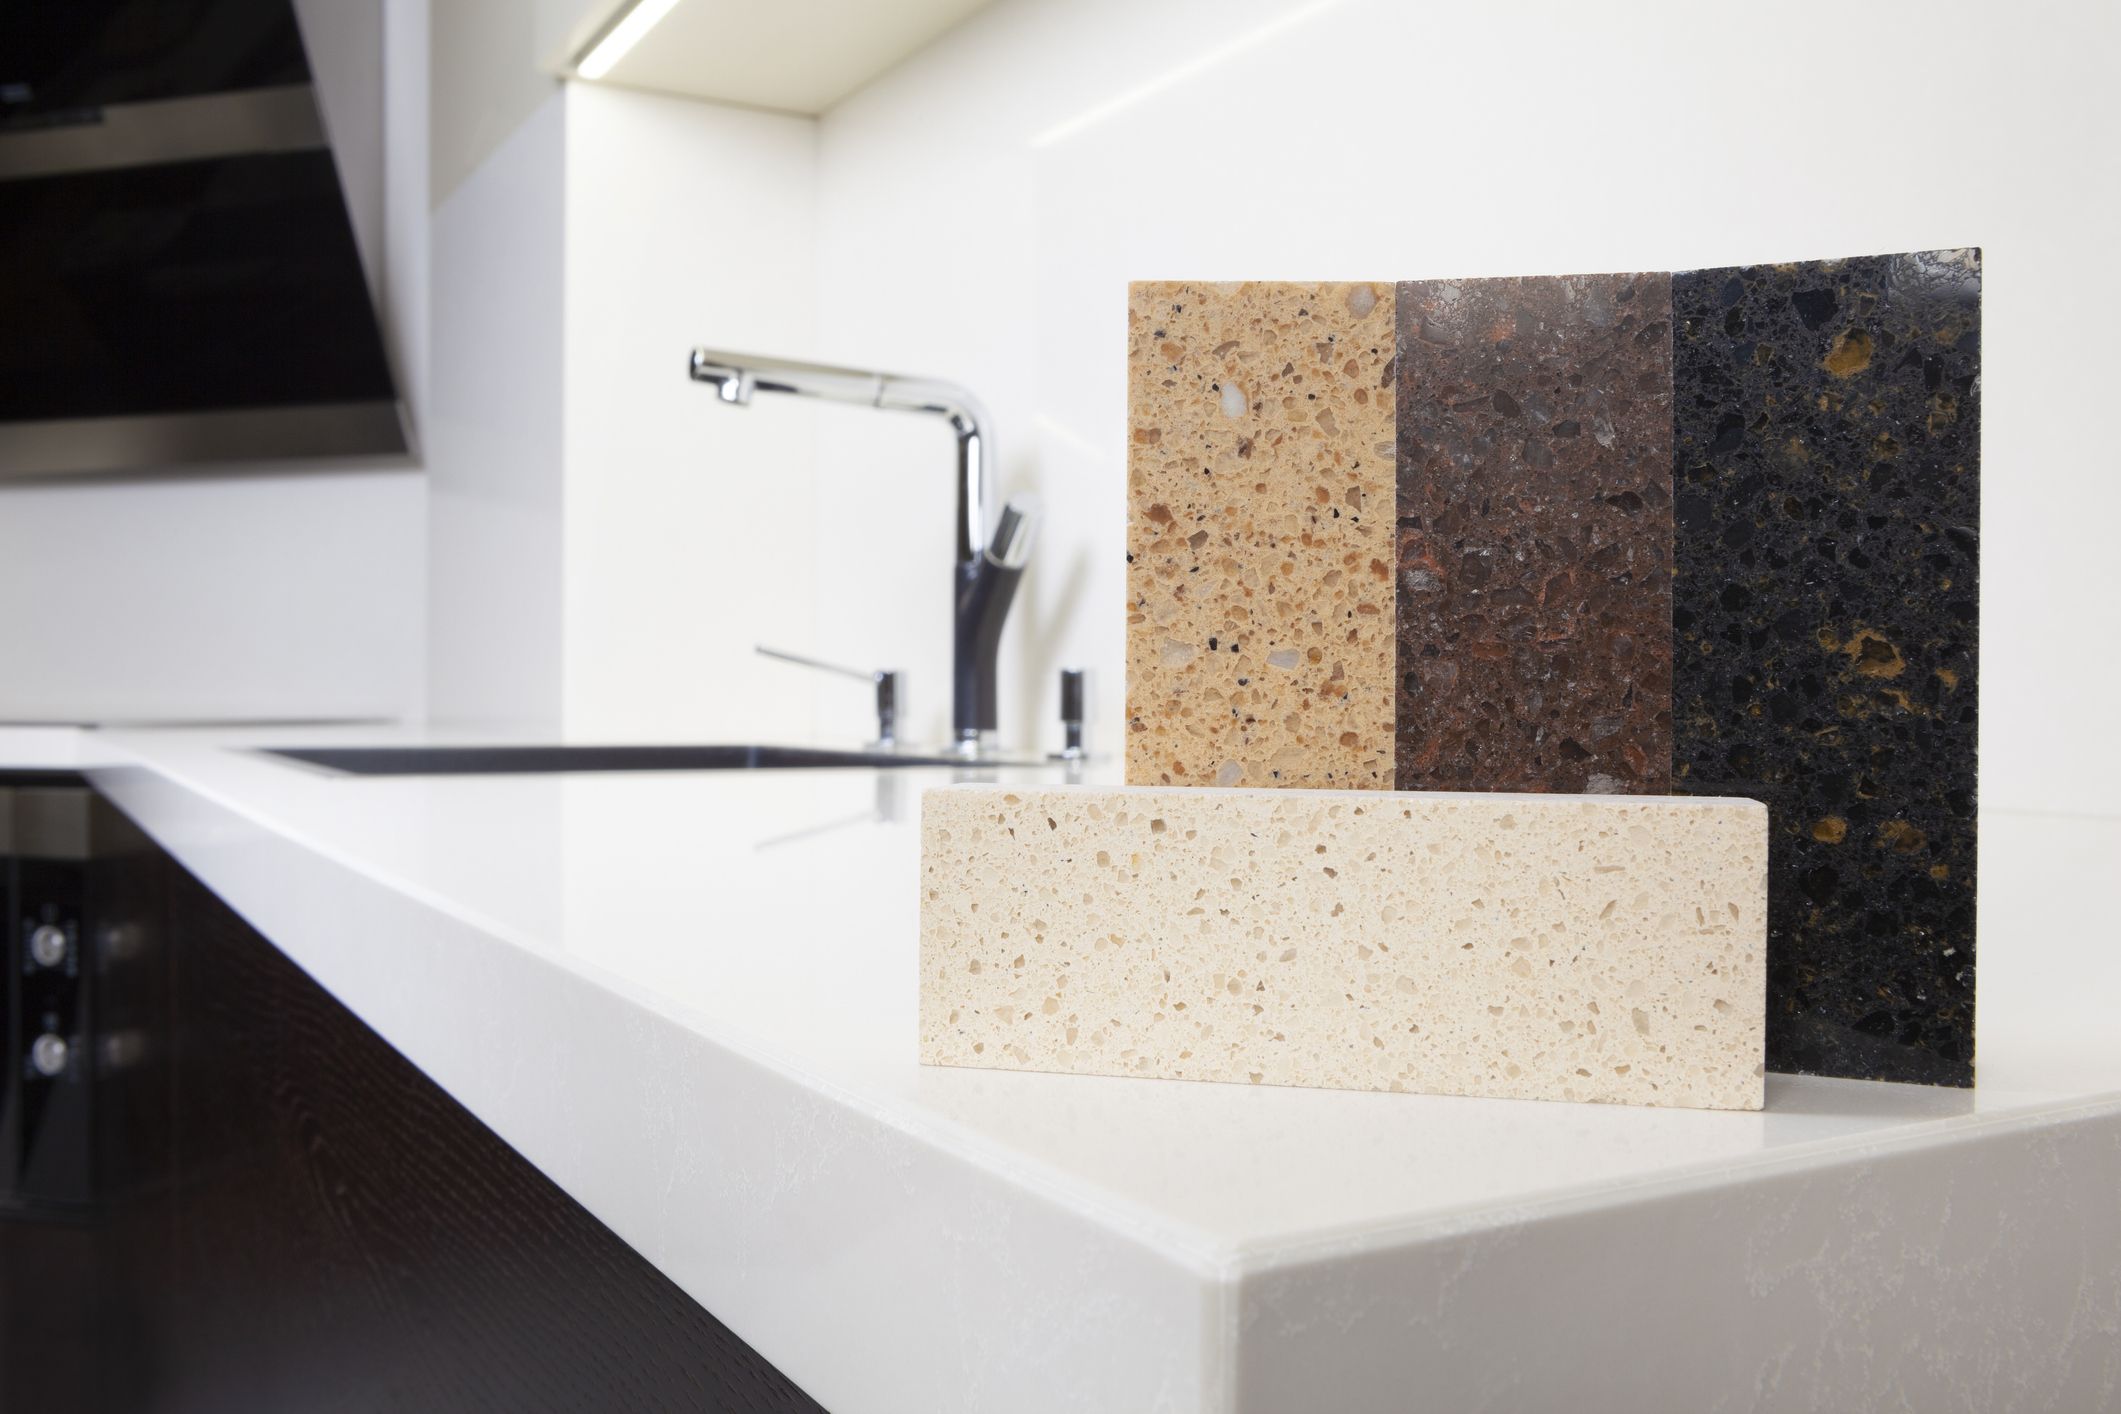 The Best Countertop Options For Kitchens, Ceramic Tile Countertops Pros And Cons